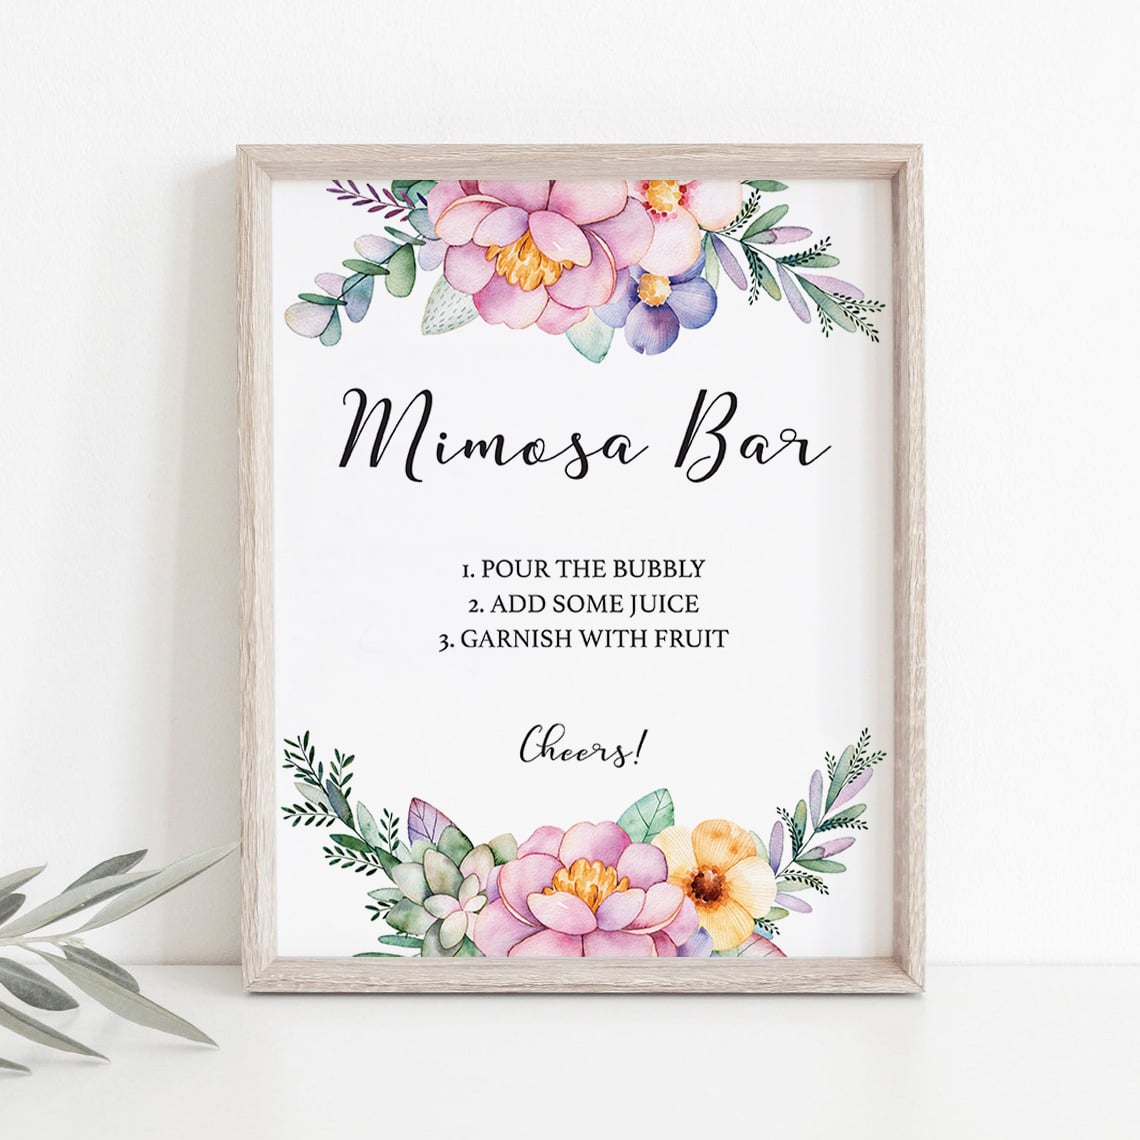 Printable floral shower mimosa bar by LittleSizzle